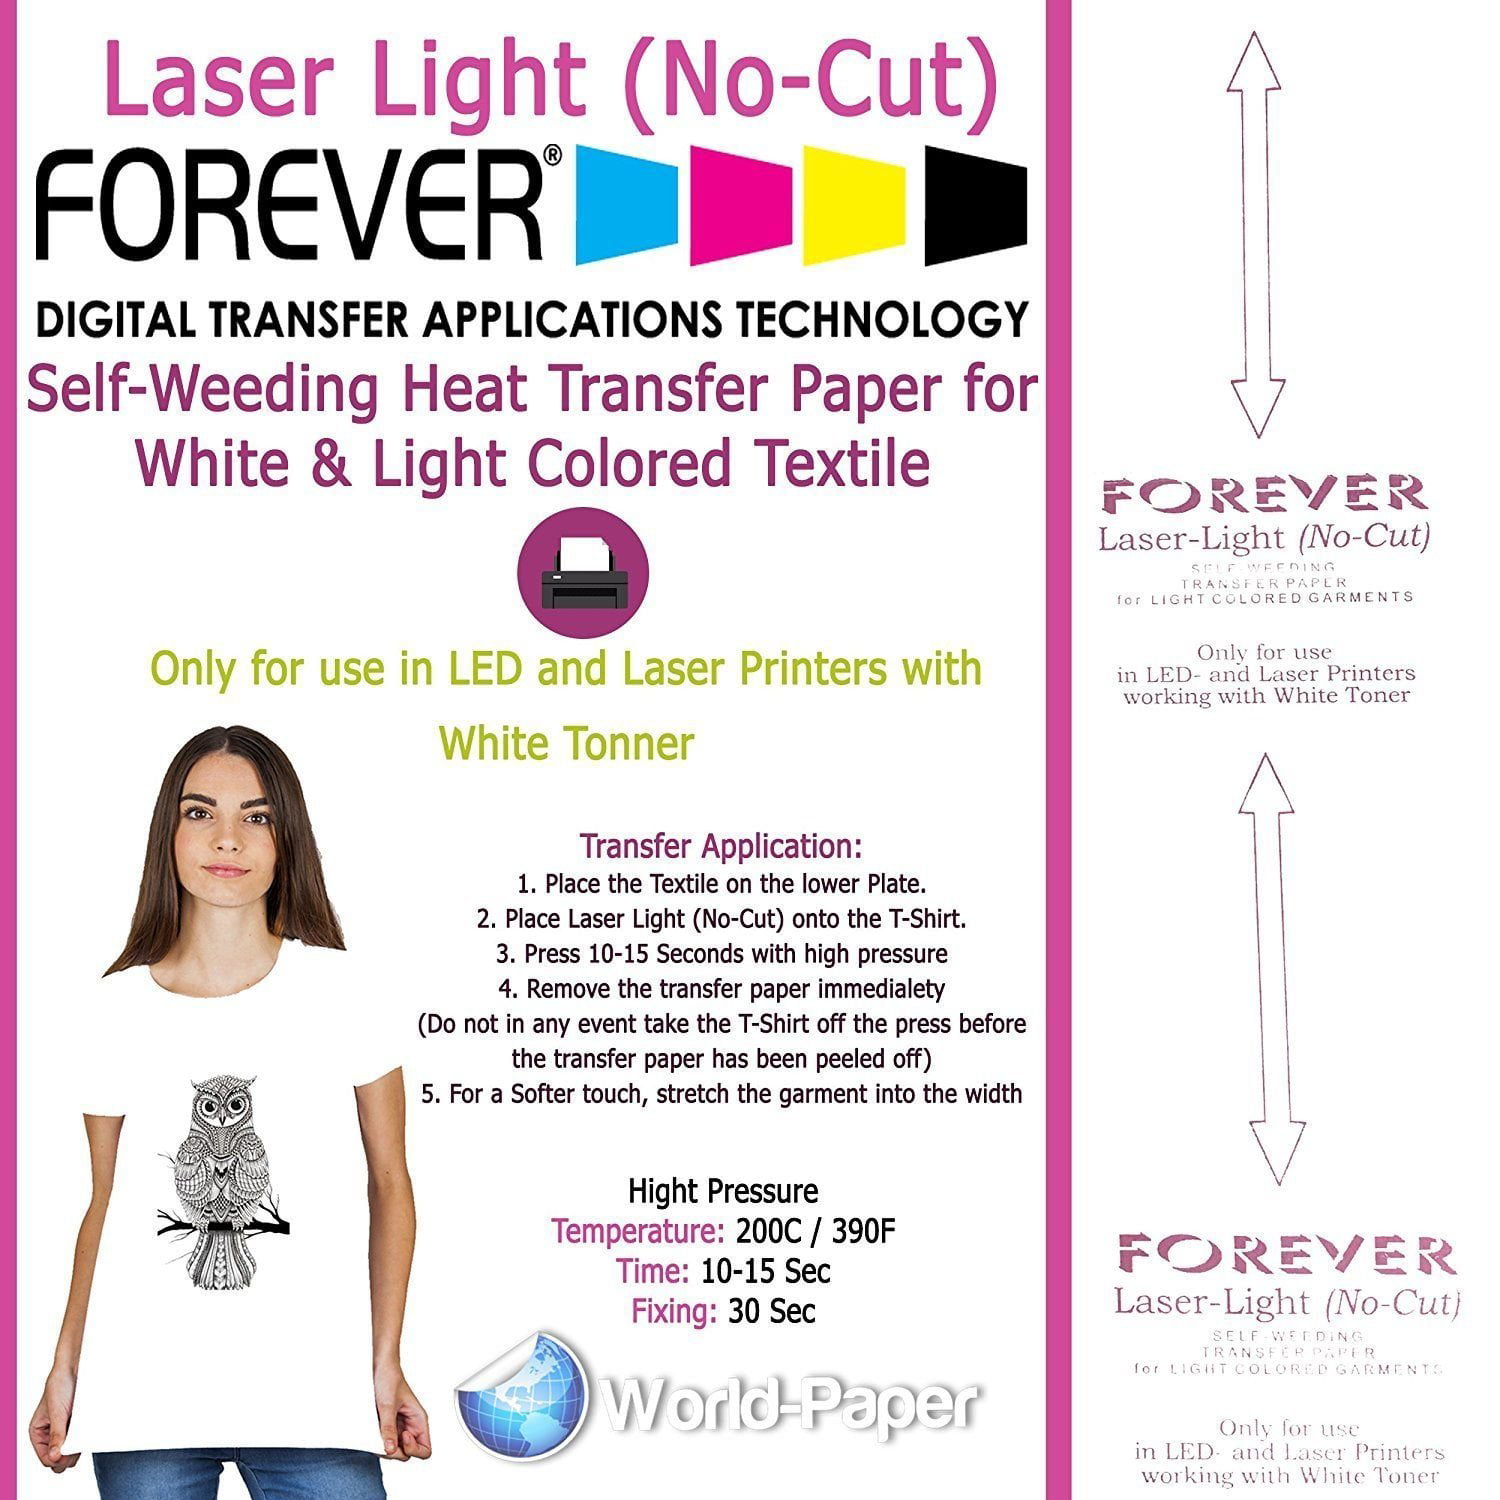 Forever Subli Light SELF WEEDING 8.5"x11" 15 Sheets FREE SHIPPING Not Cut 